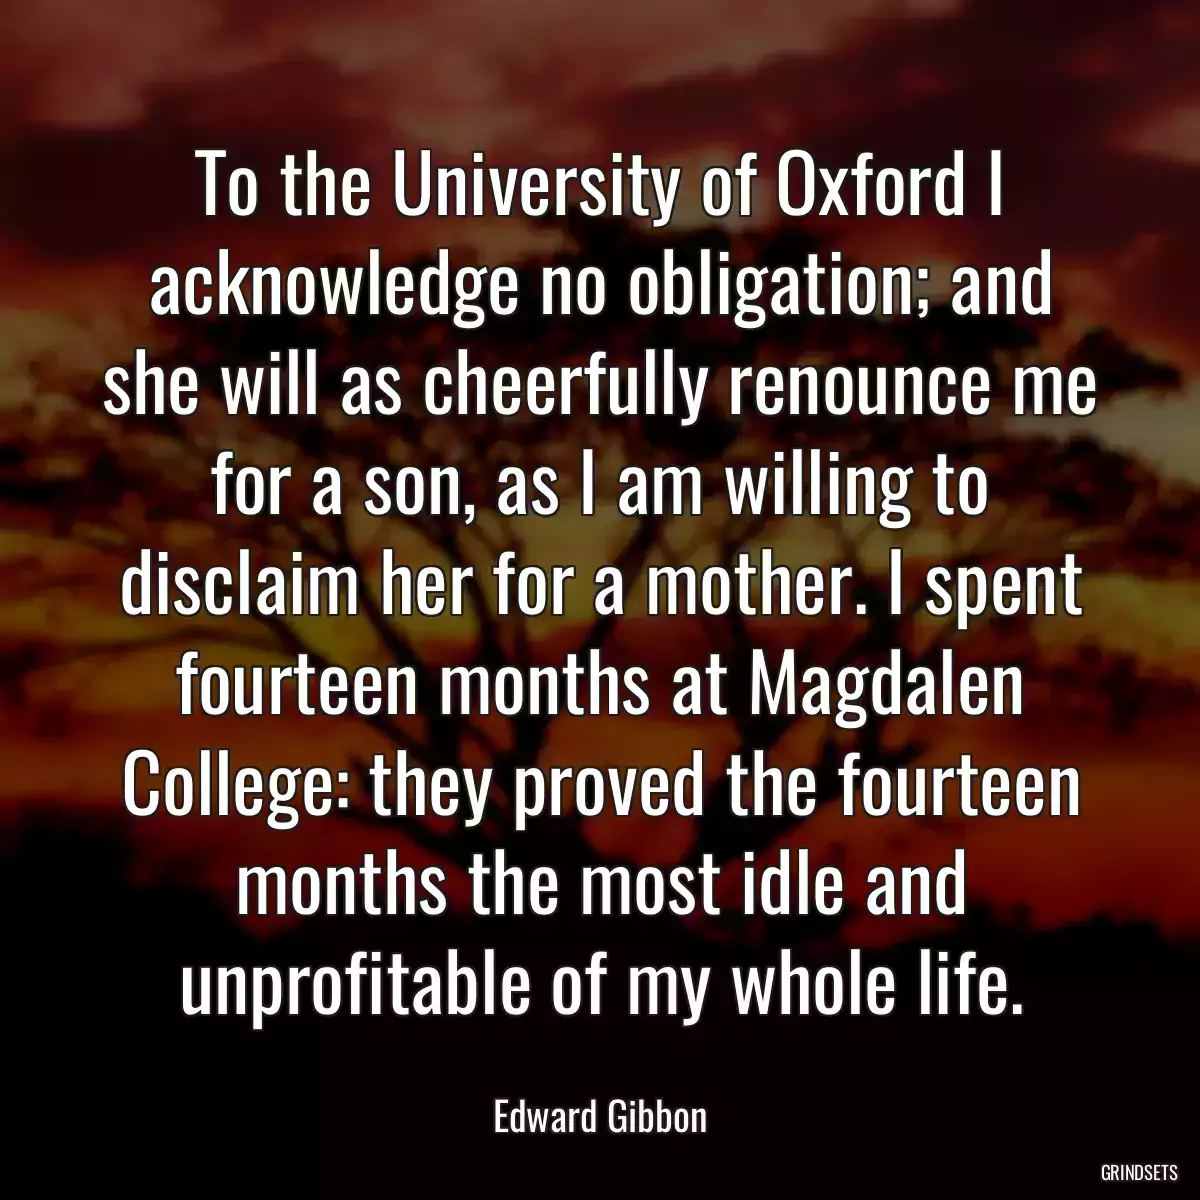 To the University of Oxford I acknowledge no obligation; and she will as cheerfully renounce me for a son, as I am willing to disclaim her for a mother. I spent fourteen months at Magdalen College: they proved the fourteen months the most idle and unprofitable of my whole life.